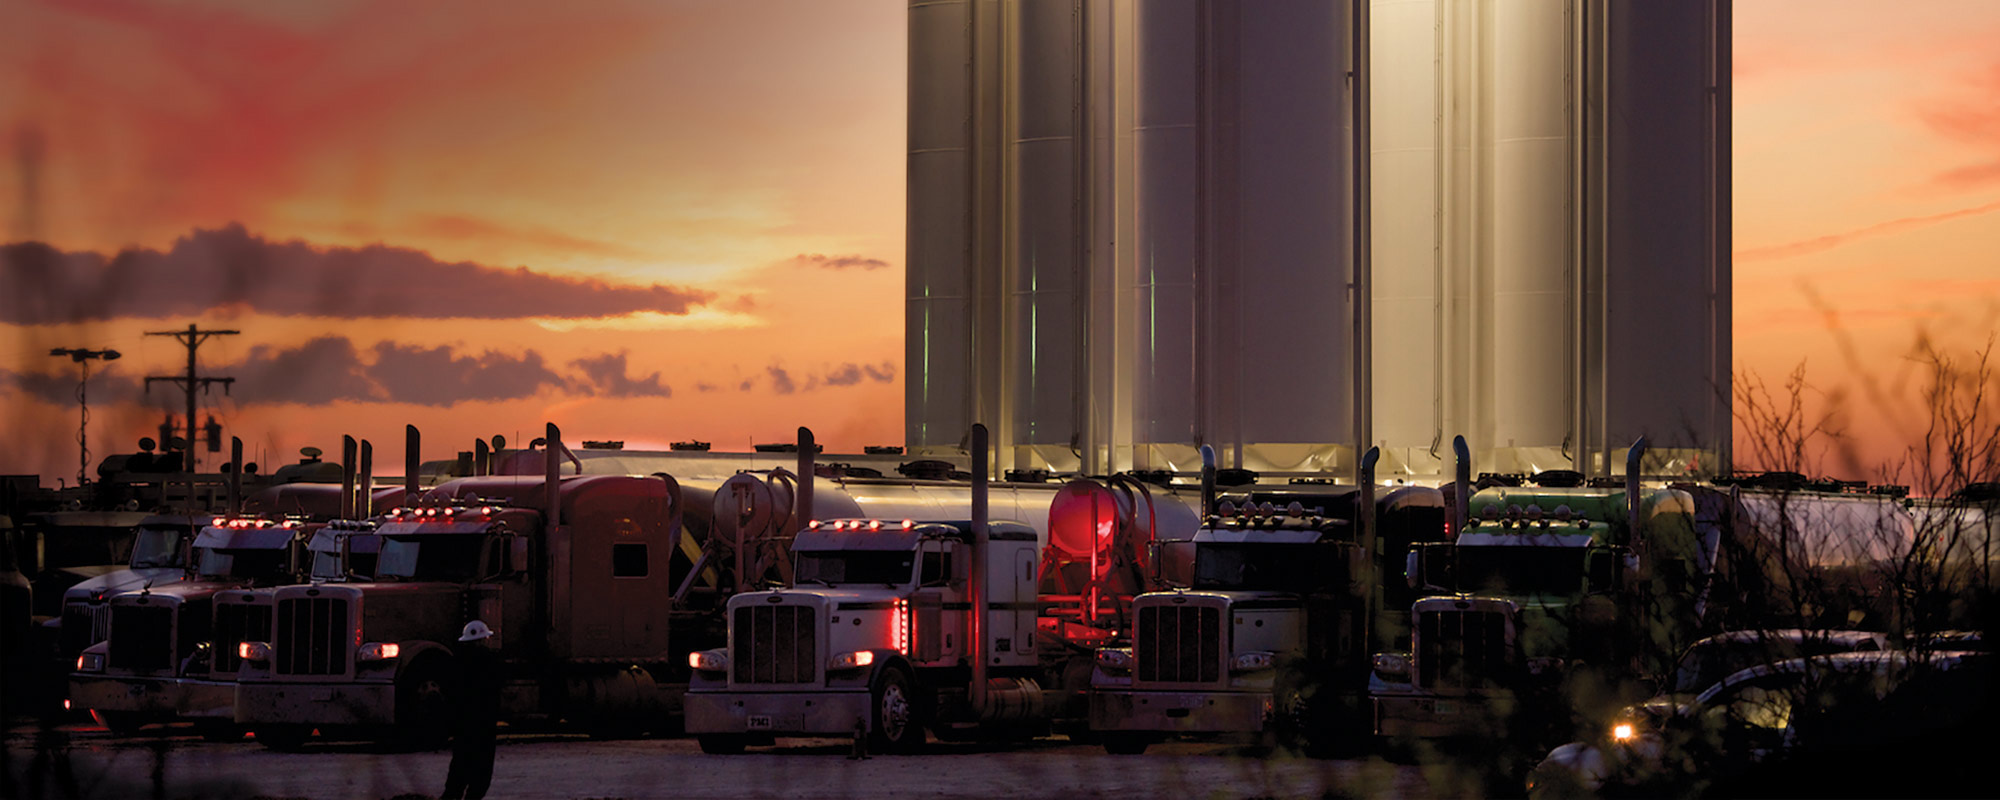 Oil trucks with oil storage containers behind it and logo in the left hand corner. 